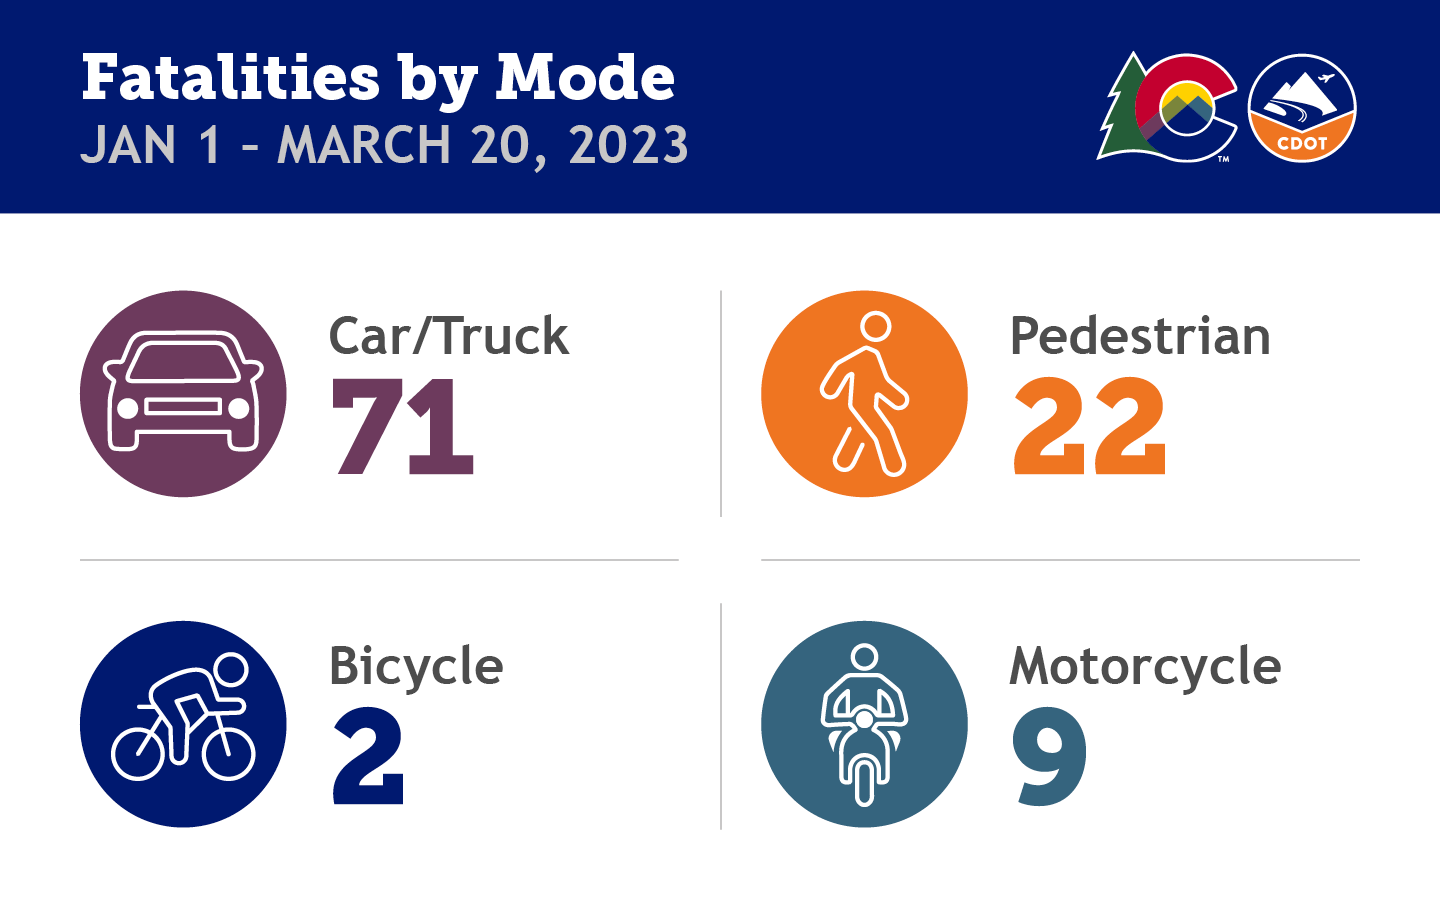 Fatalities by Mode for January 1 to March 20, 2023 detail image